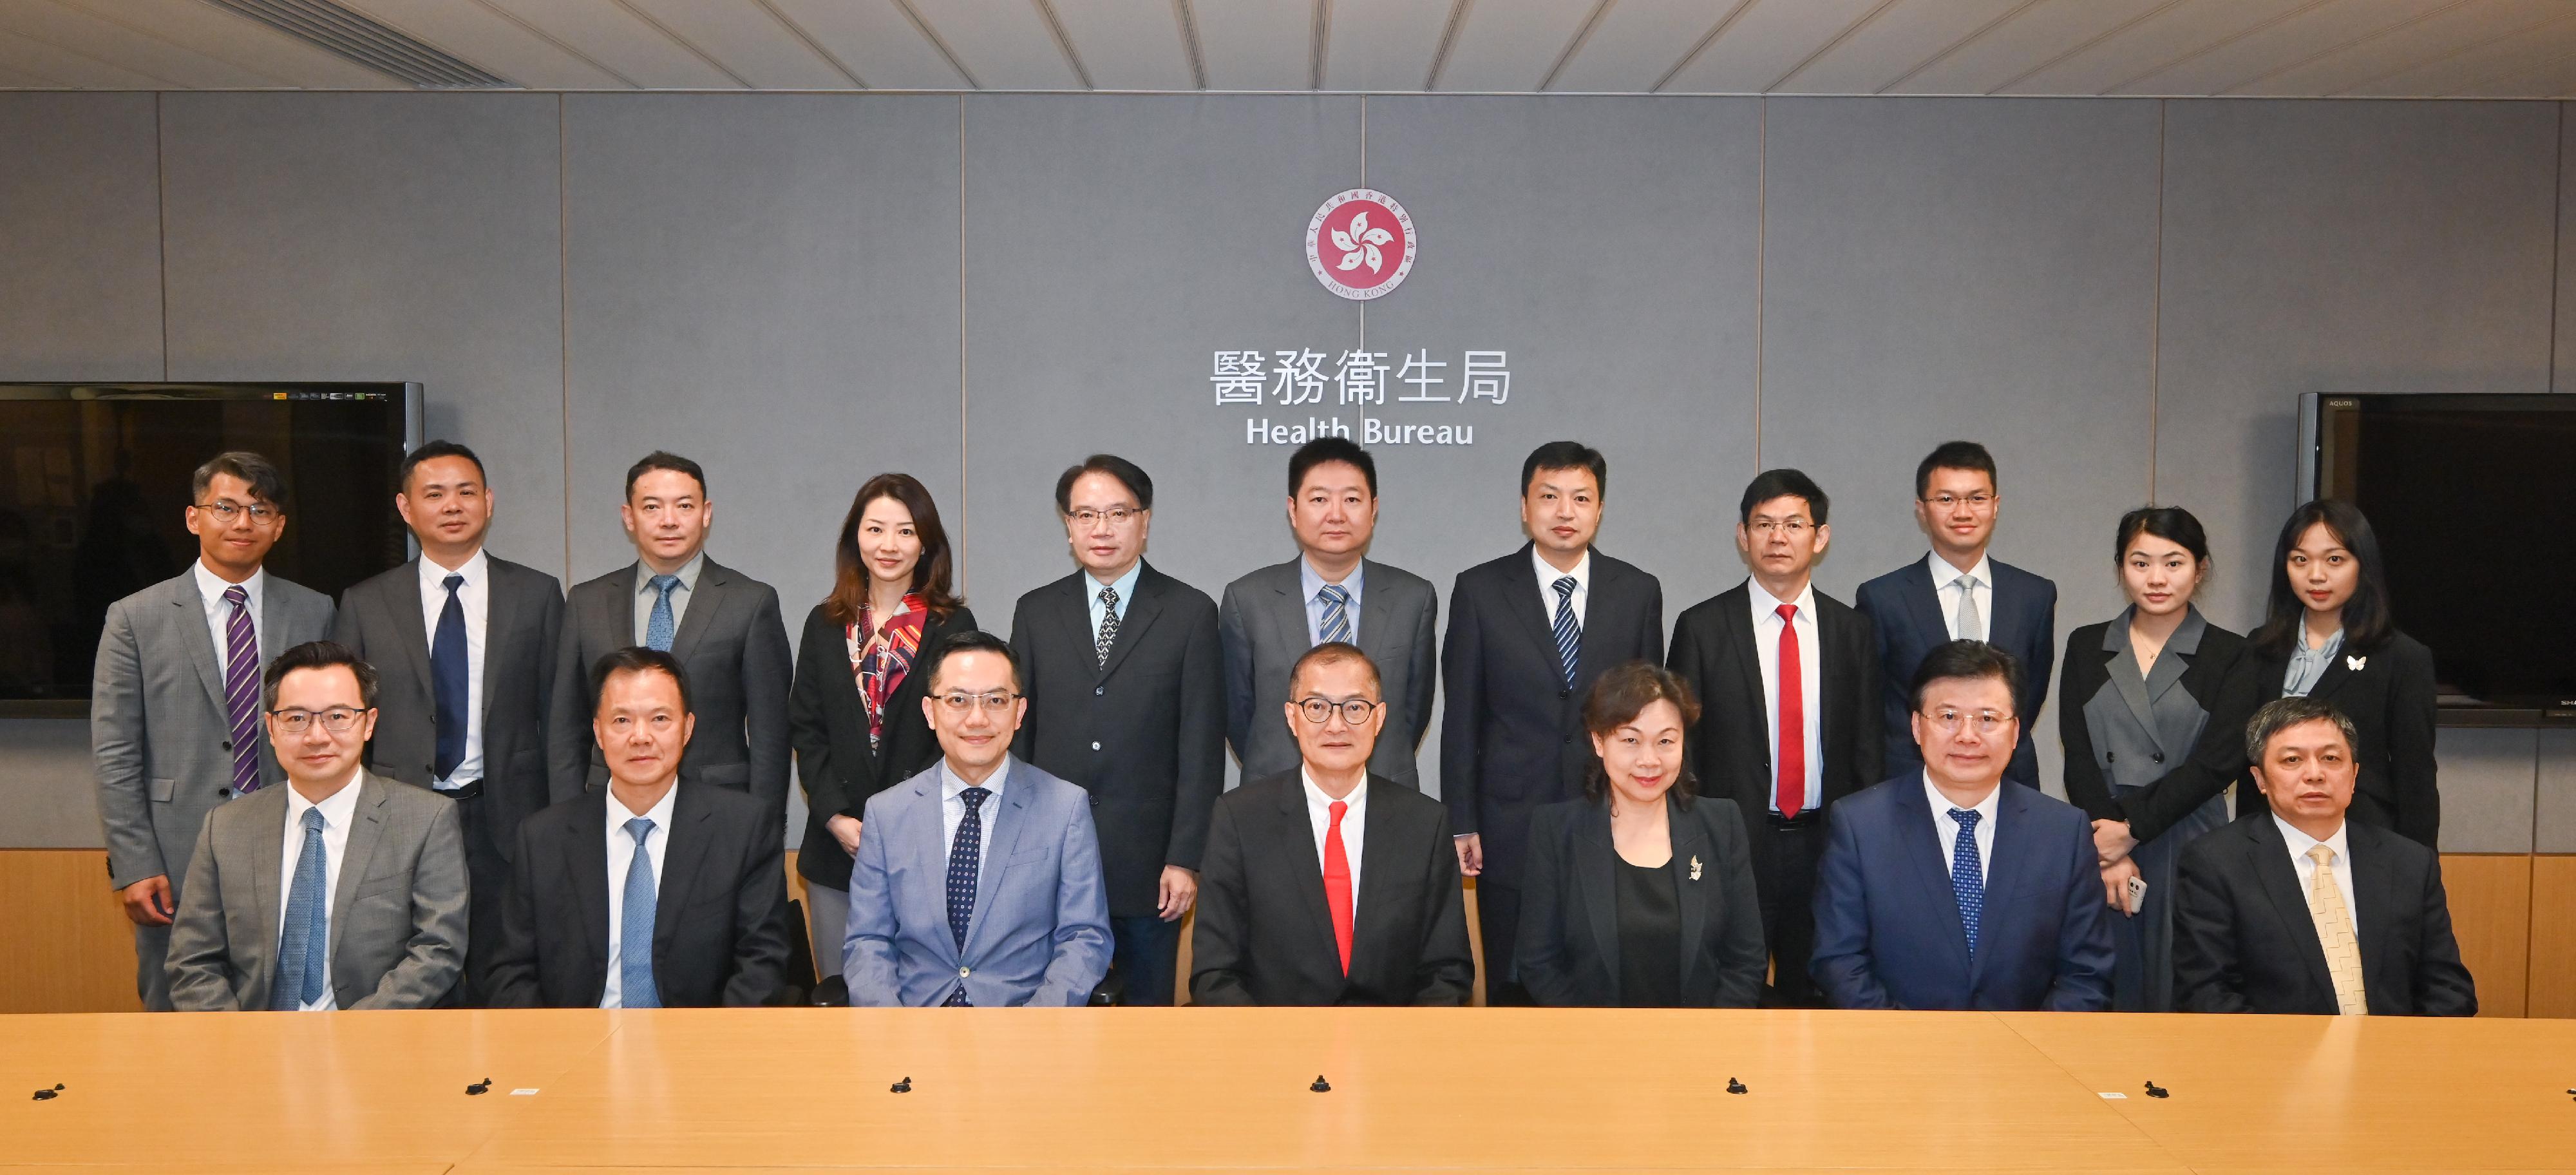 The Secretary for Health, Professor Lo Chung-mau, met with a delegation led by Vice Chairperson of the Hunan Provincial Committee of the Chinese People's Political Consultative Conference Ms Xiao Bailing at the Central Government Offices today (April 18). Photo shows Professor Lo (front row, centre); Ms Xiao (front row, third right); the Director of Health, Dr Ronald Lam (front row, third left); Deputy Secretary for Health Mr Eddie Lee (front row, first left); the Project Director of the Chinese Medicine Hospital Project Office, Dr Cheung Wai-lun (back row, fifth left), and other attendees of the meeting.